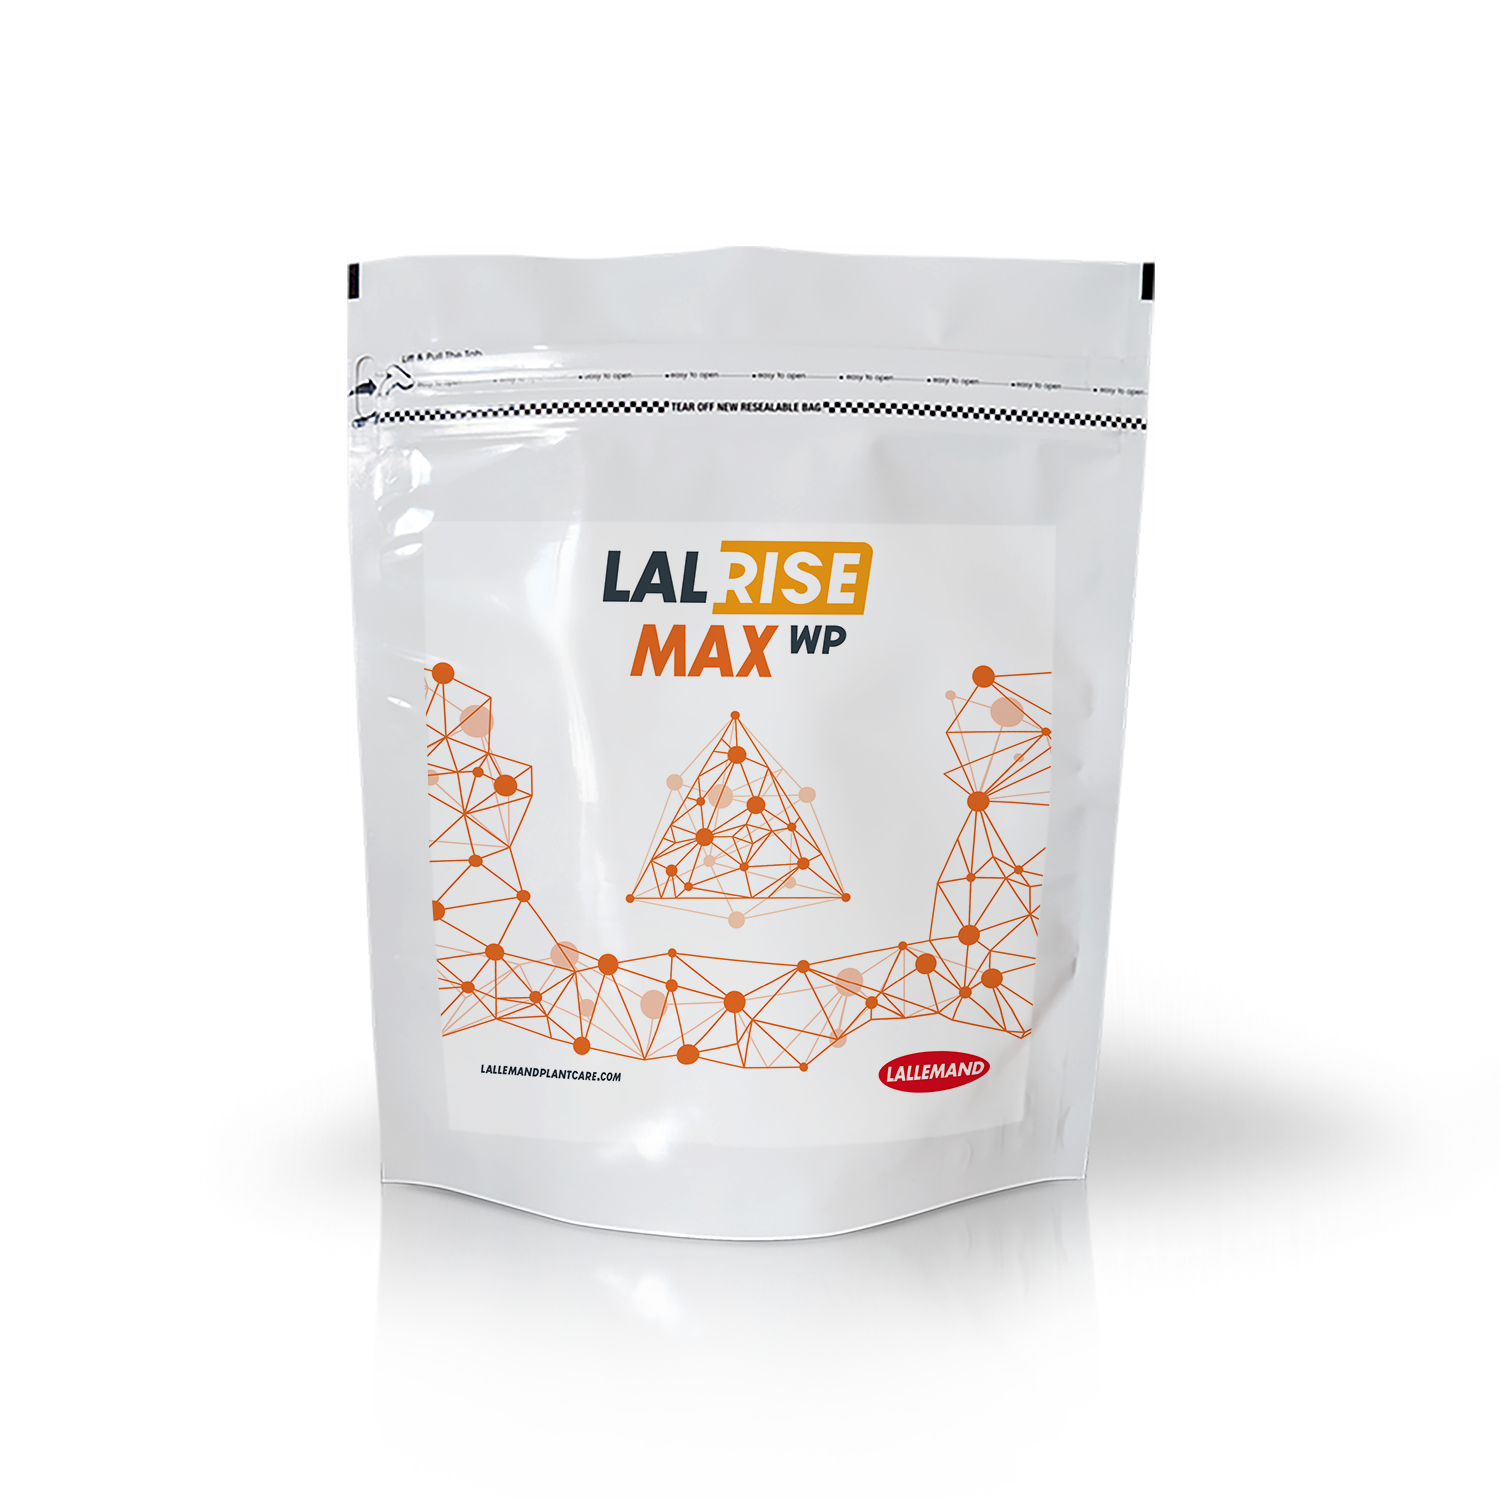 LALRISE MAX 200g bag (Isolated)